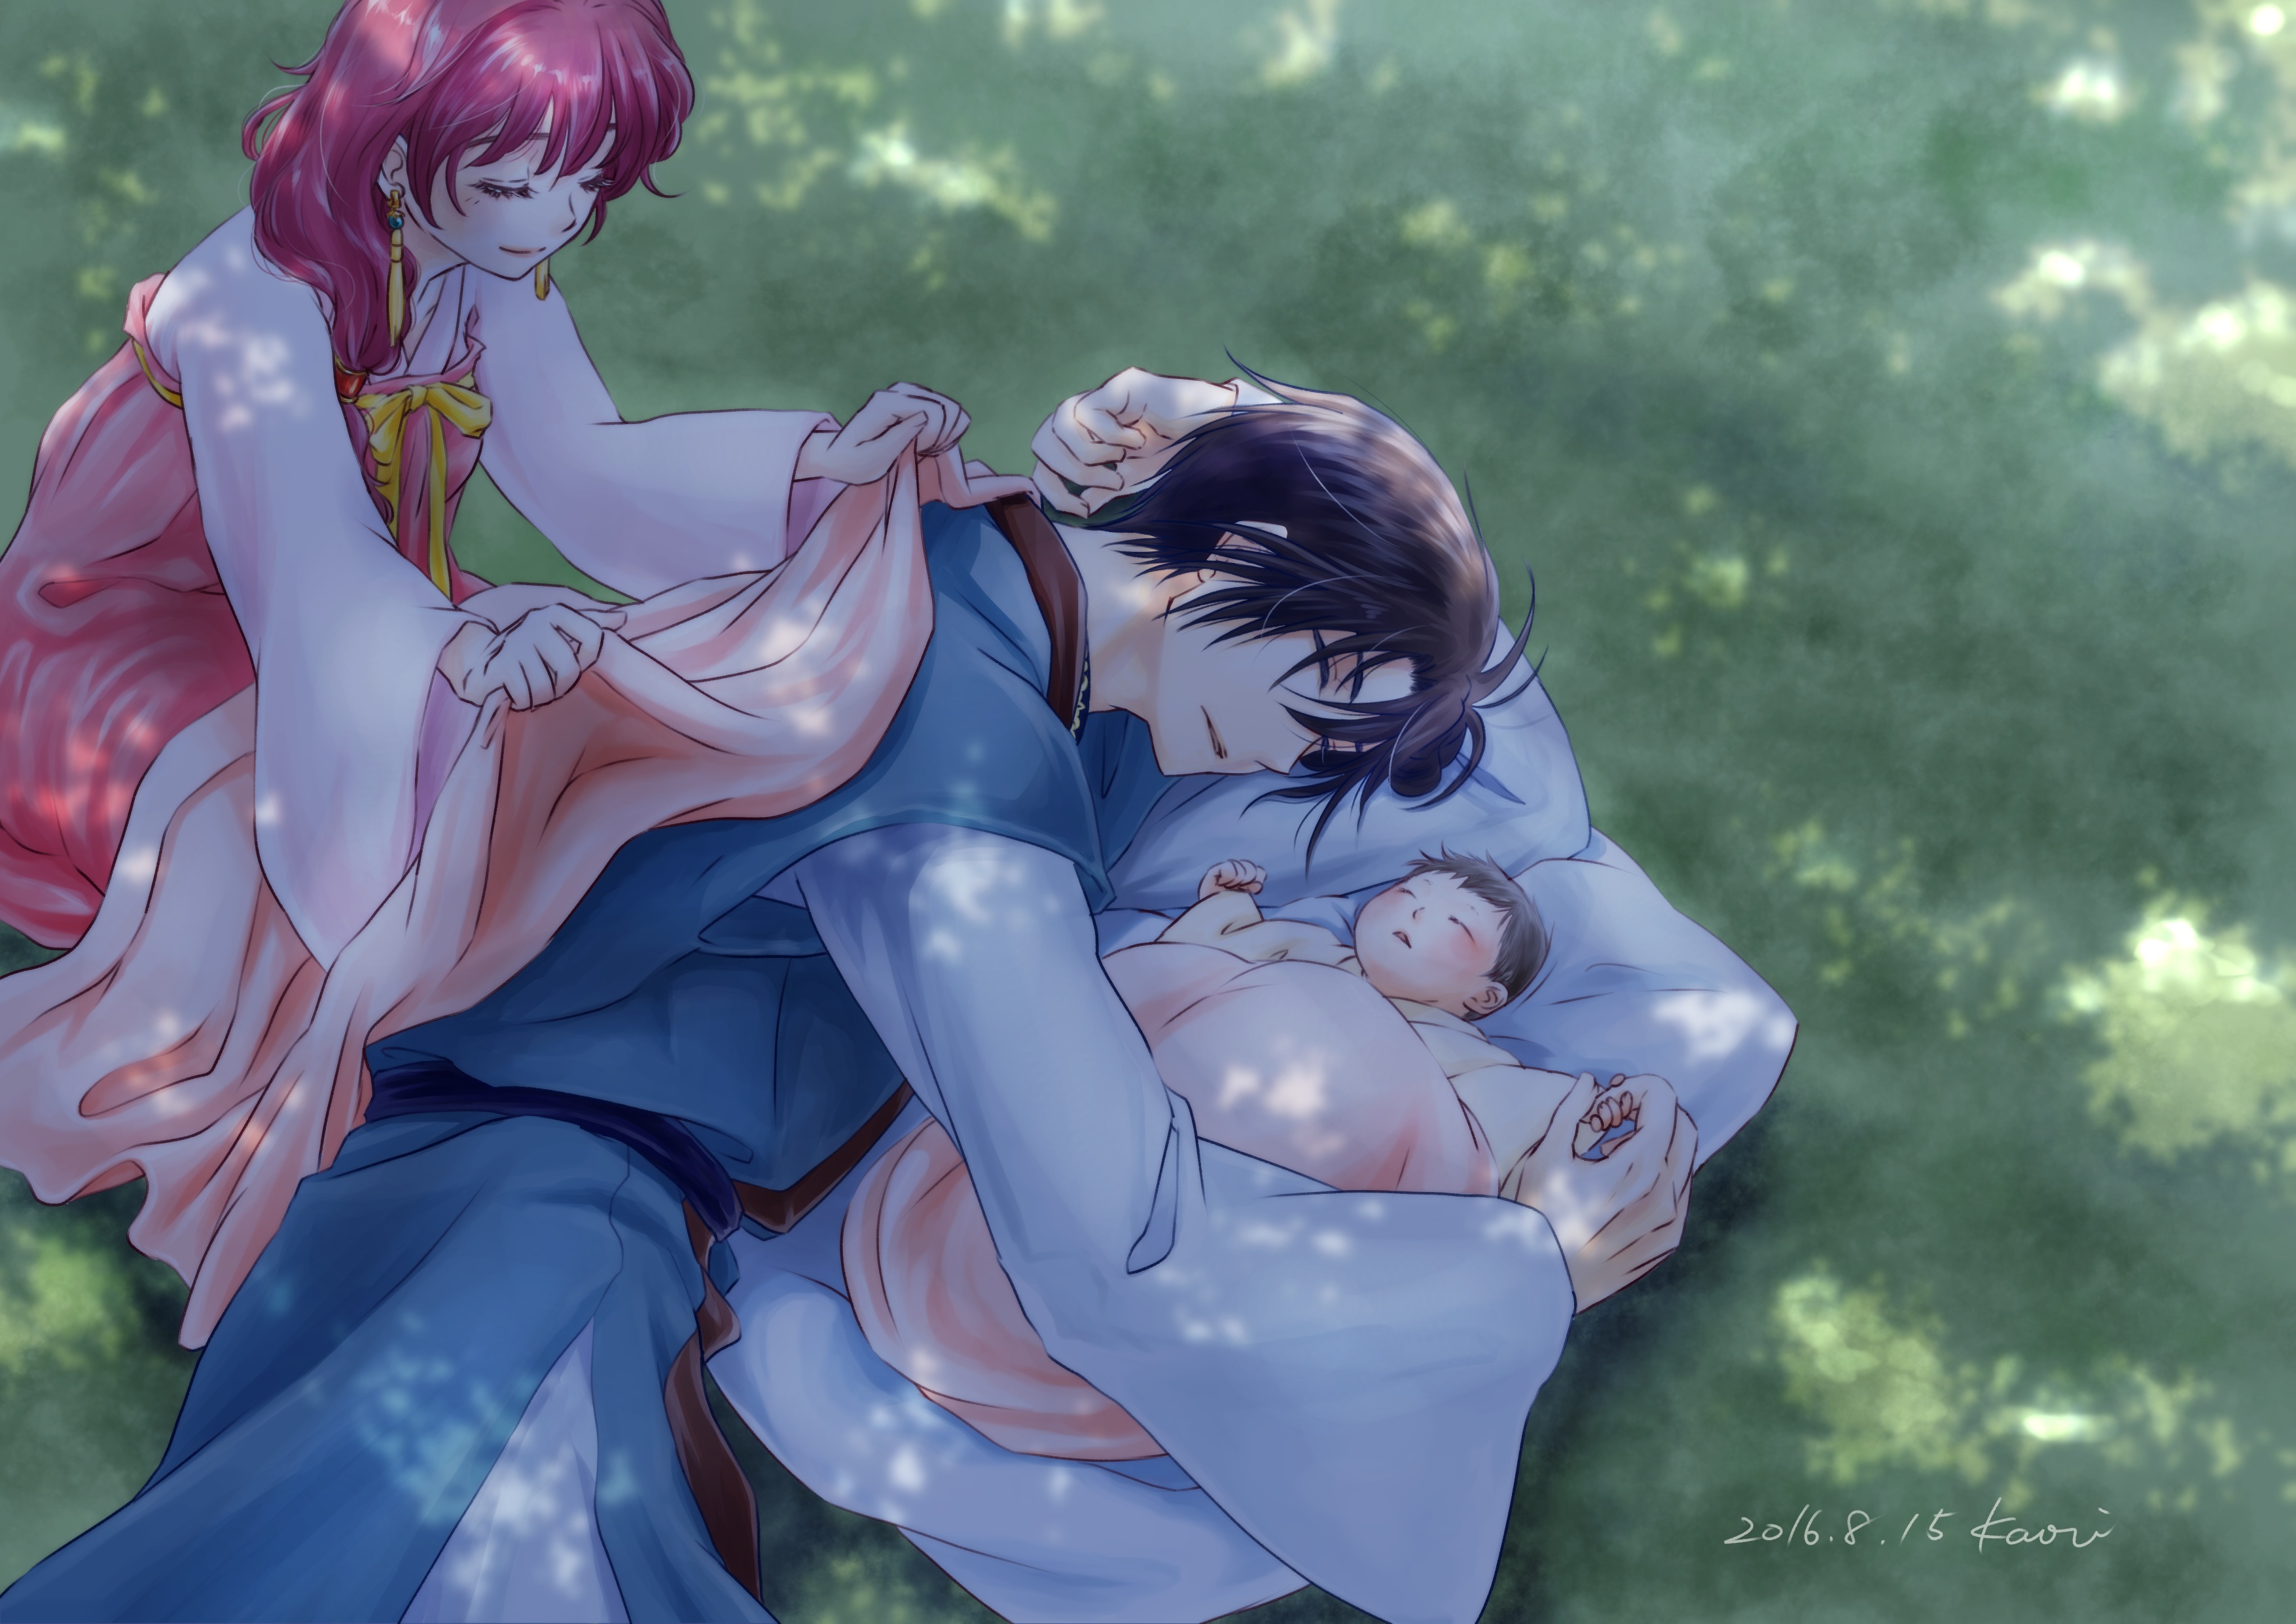 Anime Yona of the Dawn HD Wallpaper by CaO